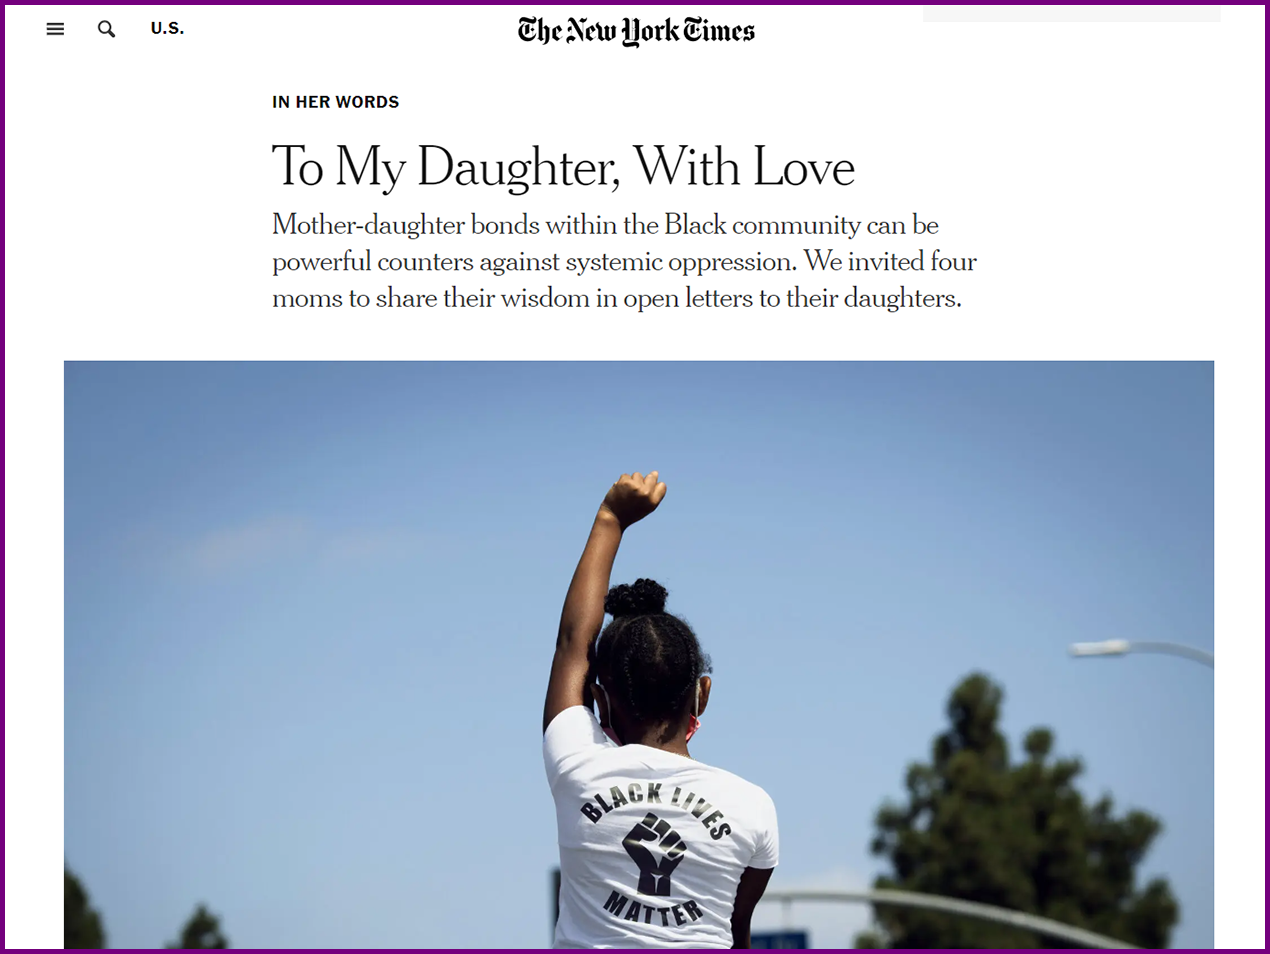 The New York Times feature: “In Her Words: To My Daughter, With Love”